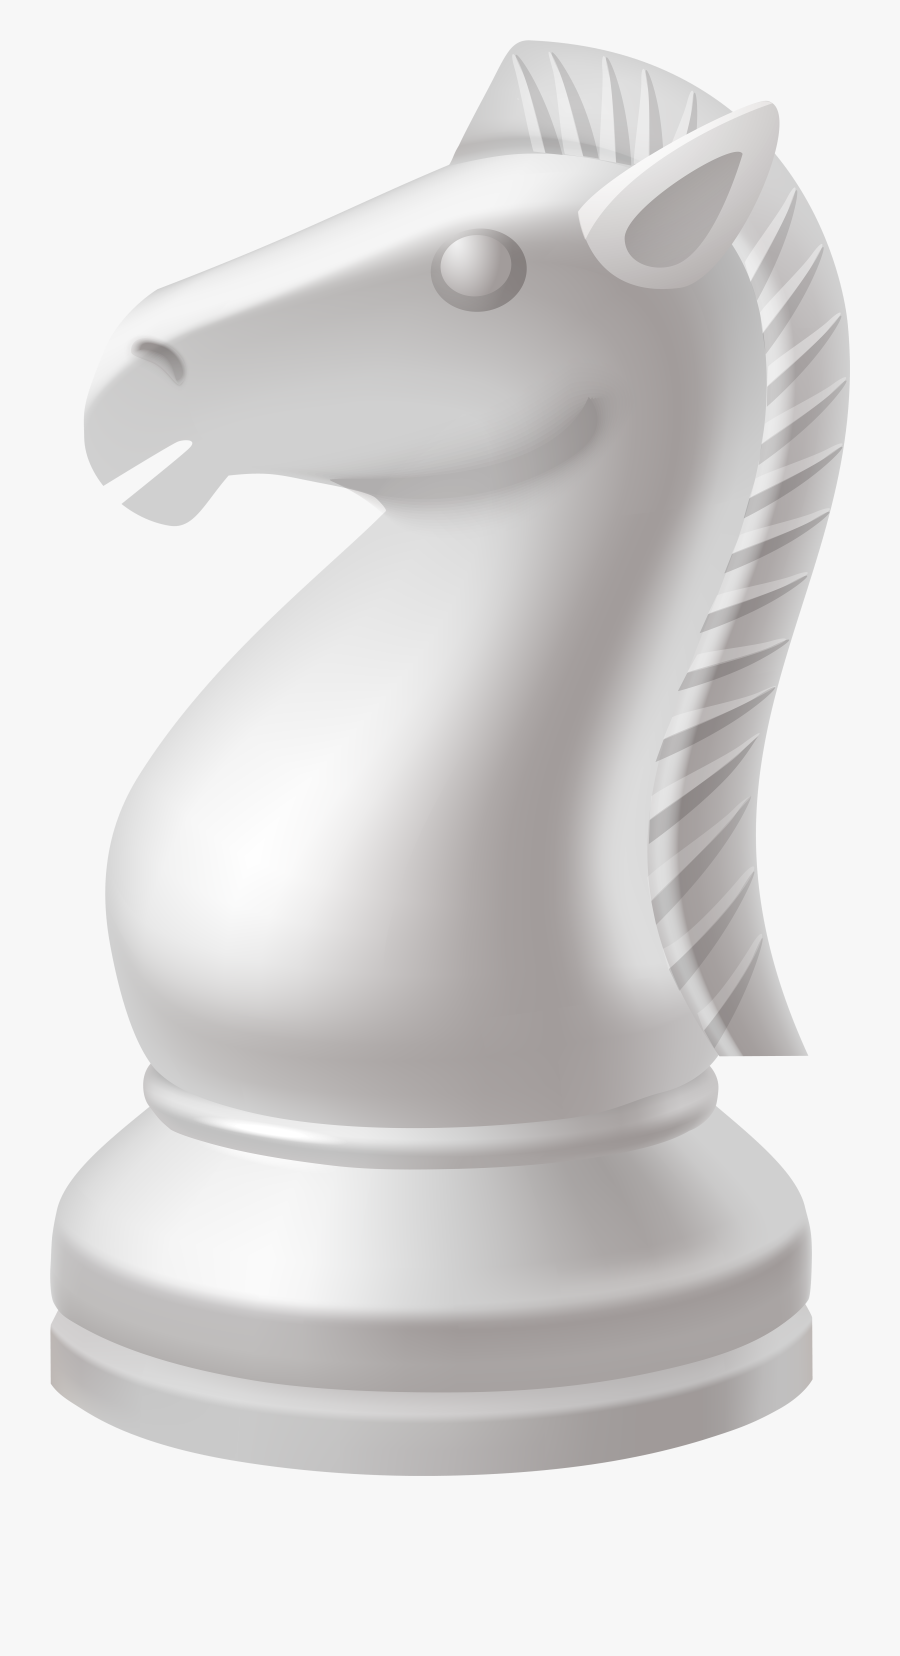 Knight Chess Piece Png - White Knight Chess Piece Png, Transparent Clipart